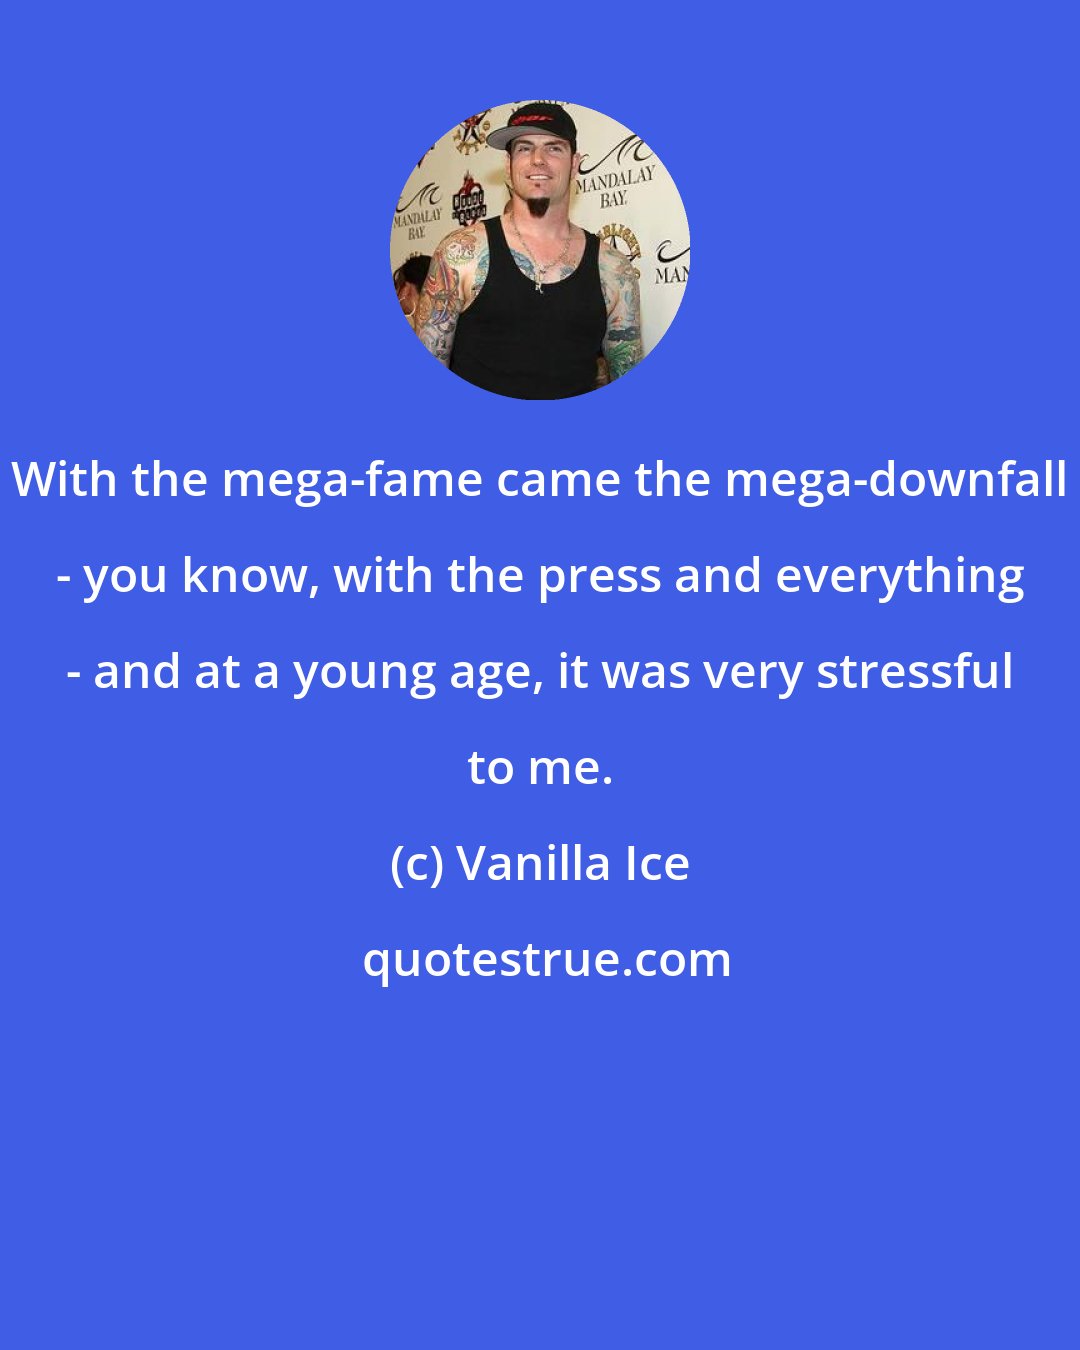 Vanilla Ice: With the mega-fame came the mega-downfall - you know, with the press and everything - and at a young age, it was very stressful to me.